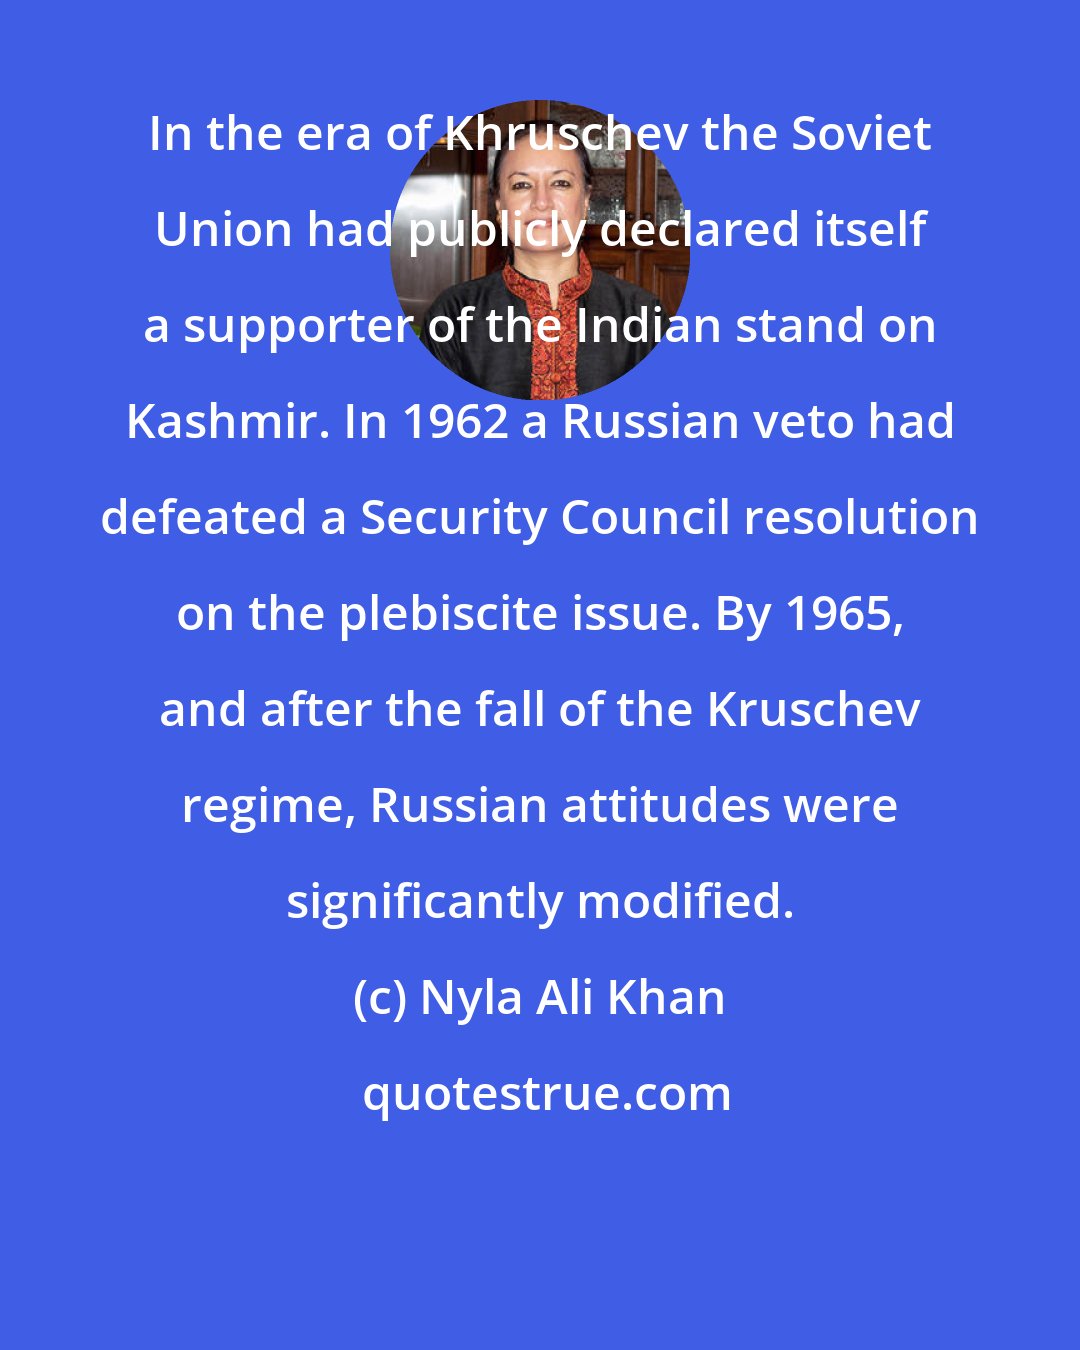 Nyla Ali Khan: In the era of Khruschev the Soviet Union had publicly declared itself a supporter of the Indian stand on Kashmir. In 1962 a Russian veto had defeated a Security Council resolution on the plebiscite issue. By 1965, and after the fall of the Kruschev regime, Russian attitudes were significantly modified.